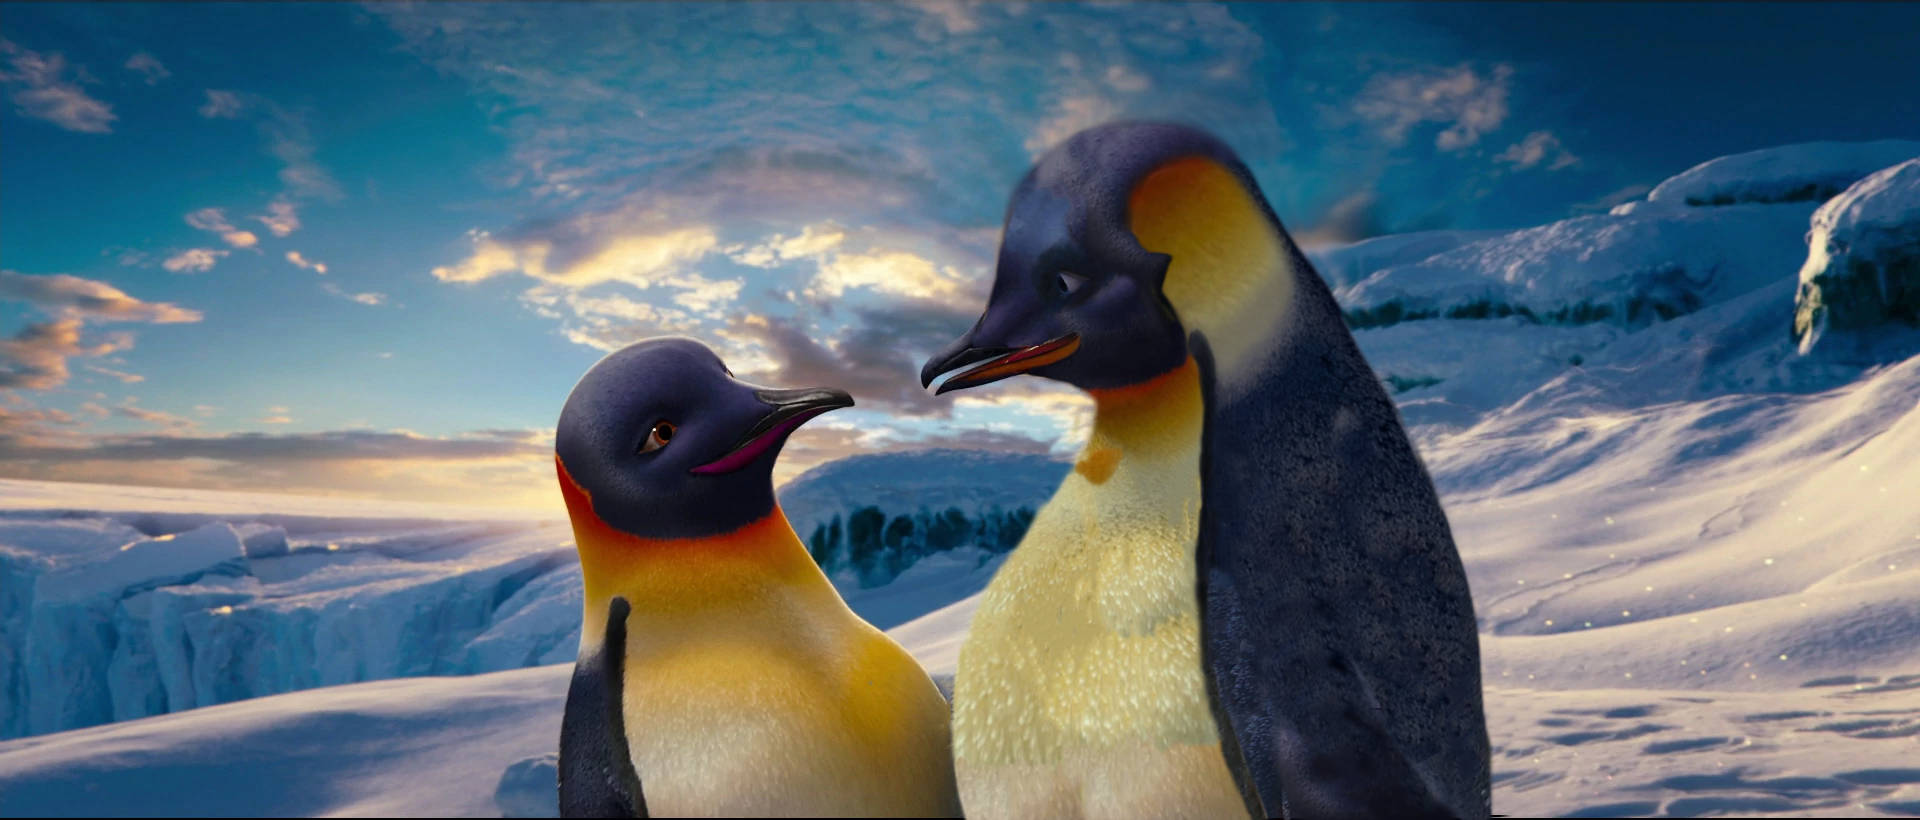 two penguins are standing in the snow Wallpaper